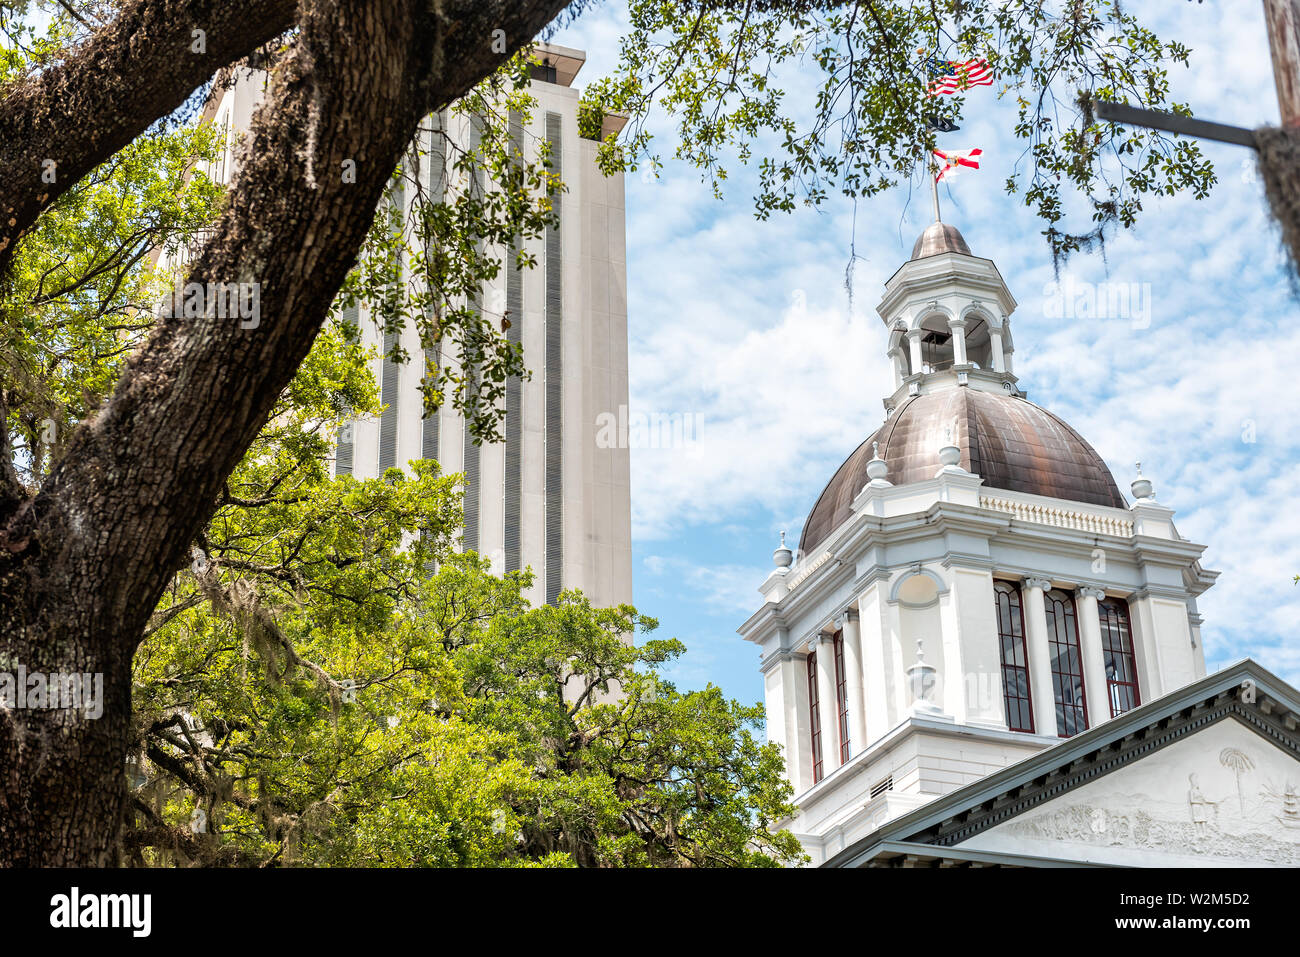 Tallahassee, USA - April 26, 2018: State capitol building in Florida during day with modern architecture of government and tree closeup Stock Photo